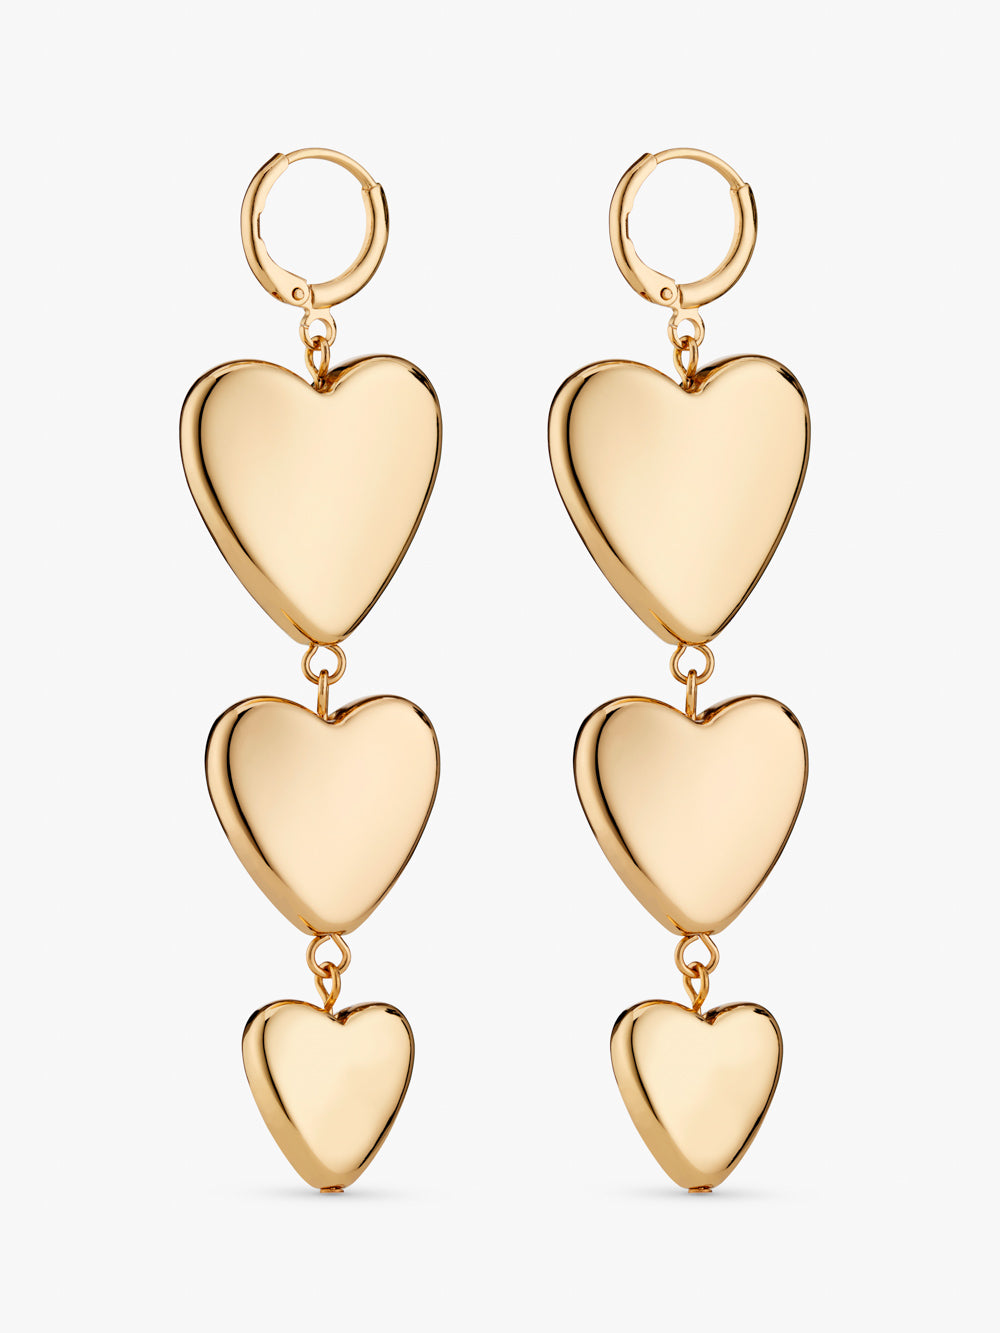 Small Stuff Accessories - Large heart drop earrings in a shinny gold finish